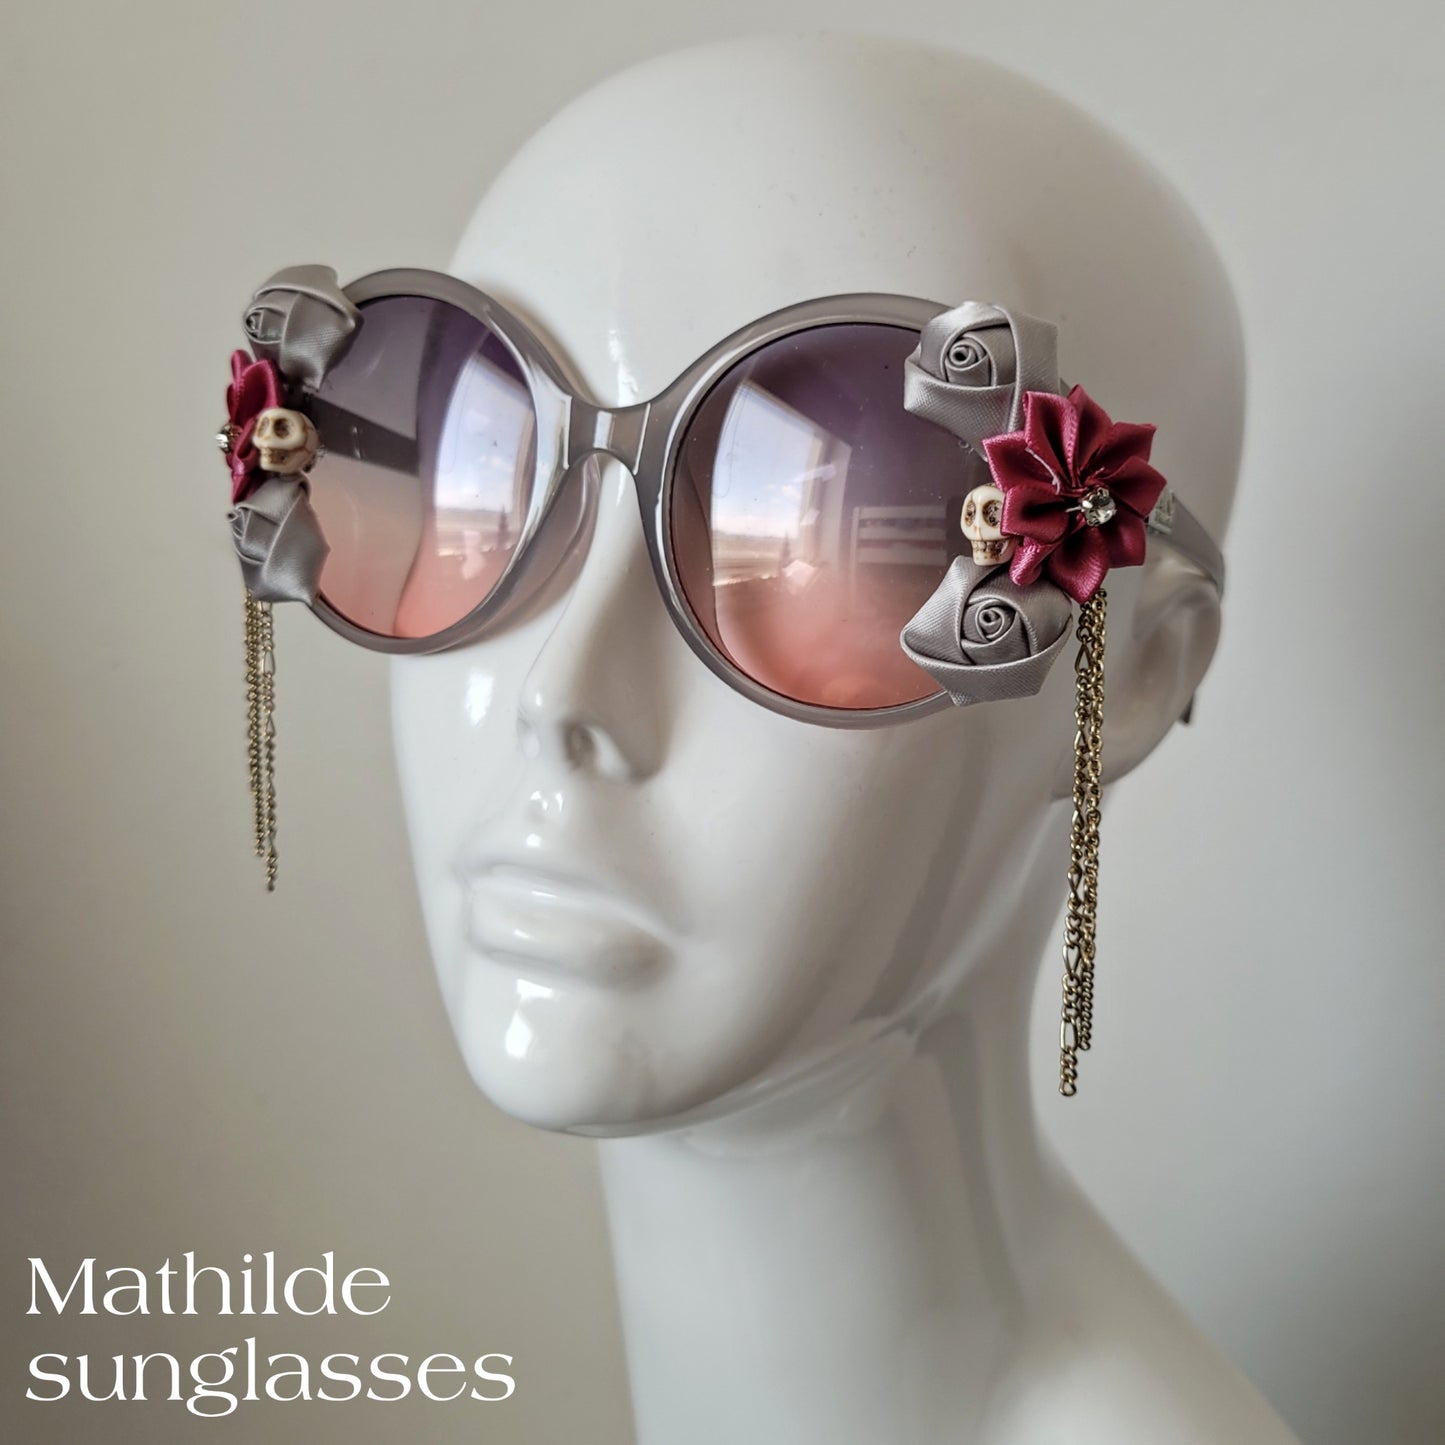 Á vallians coeurs riens impossible Collection: The Mathilde sunglasses